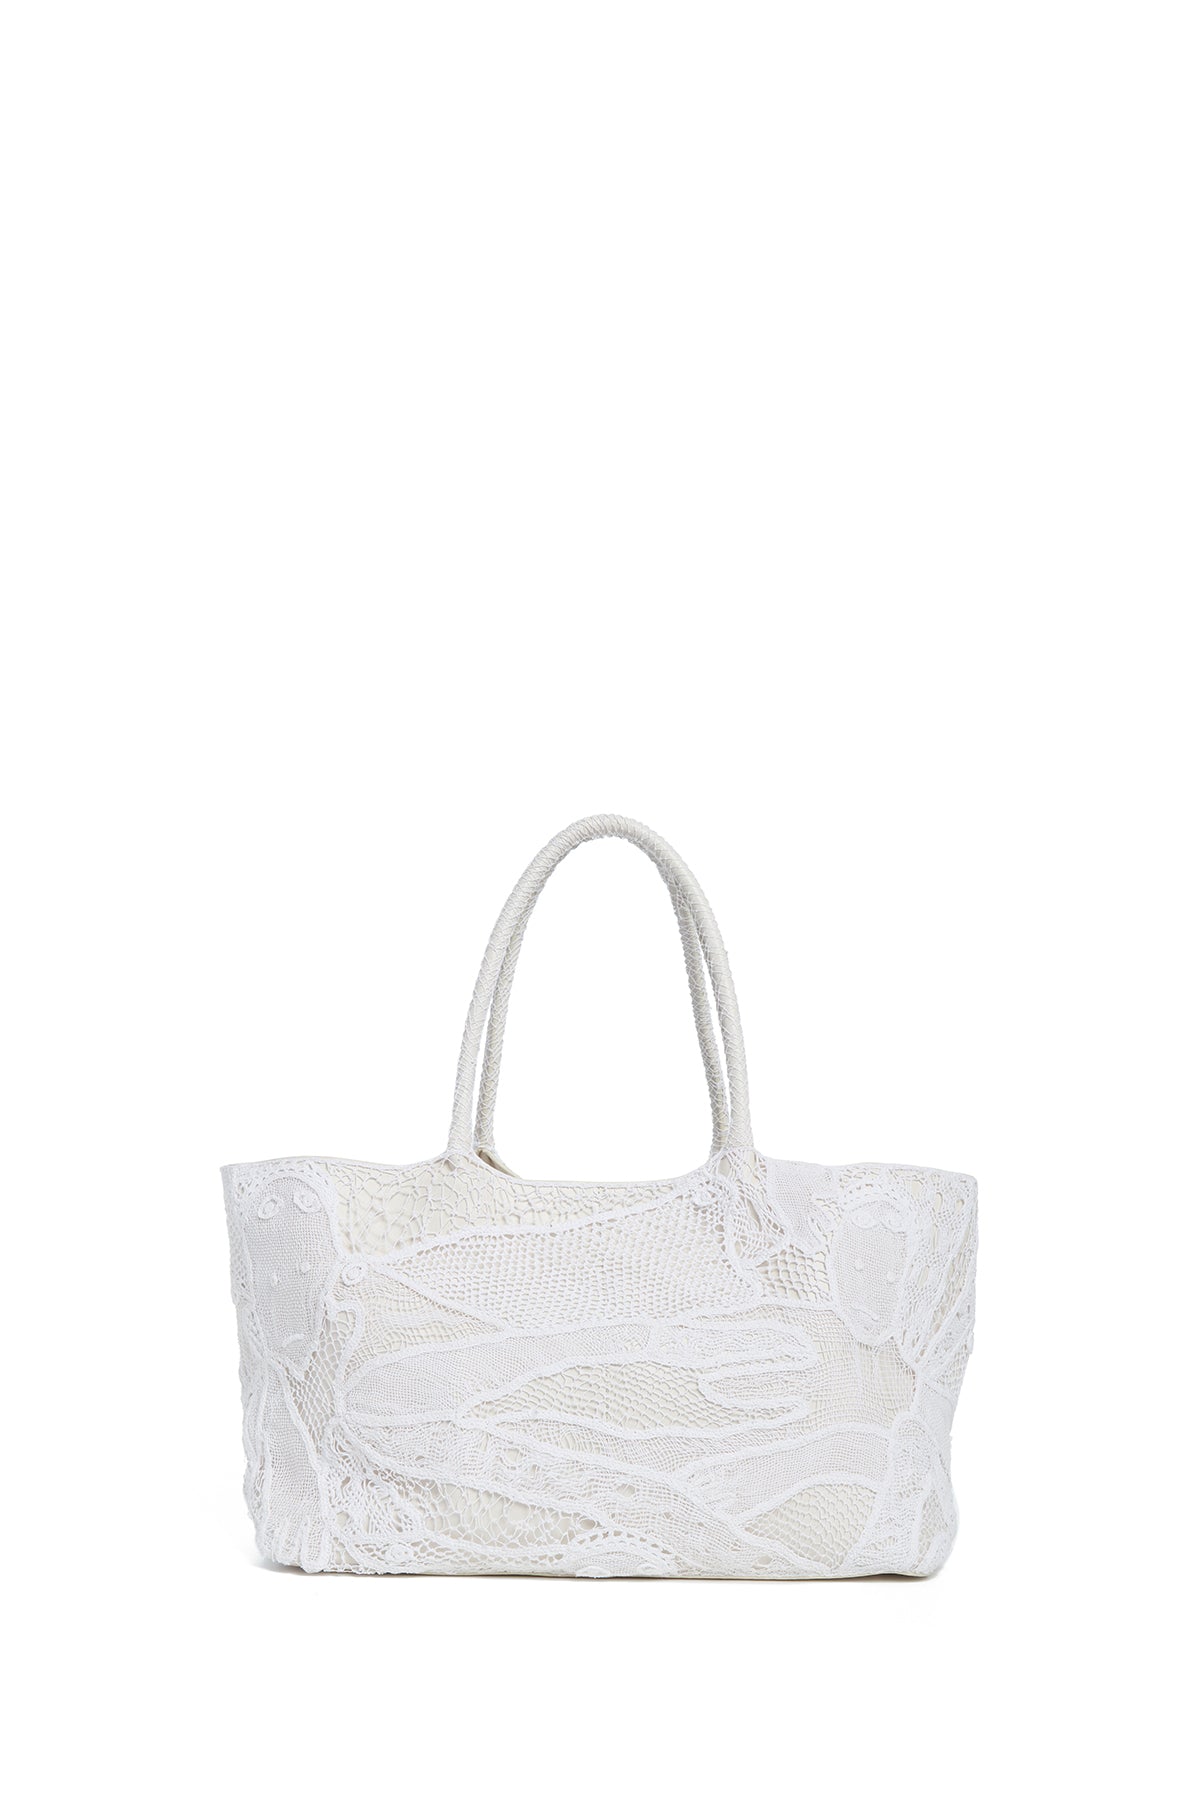 Gabriela Hearst Mcewan Tote Bag In Ivory Leather With Cotton Macrame